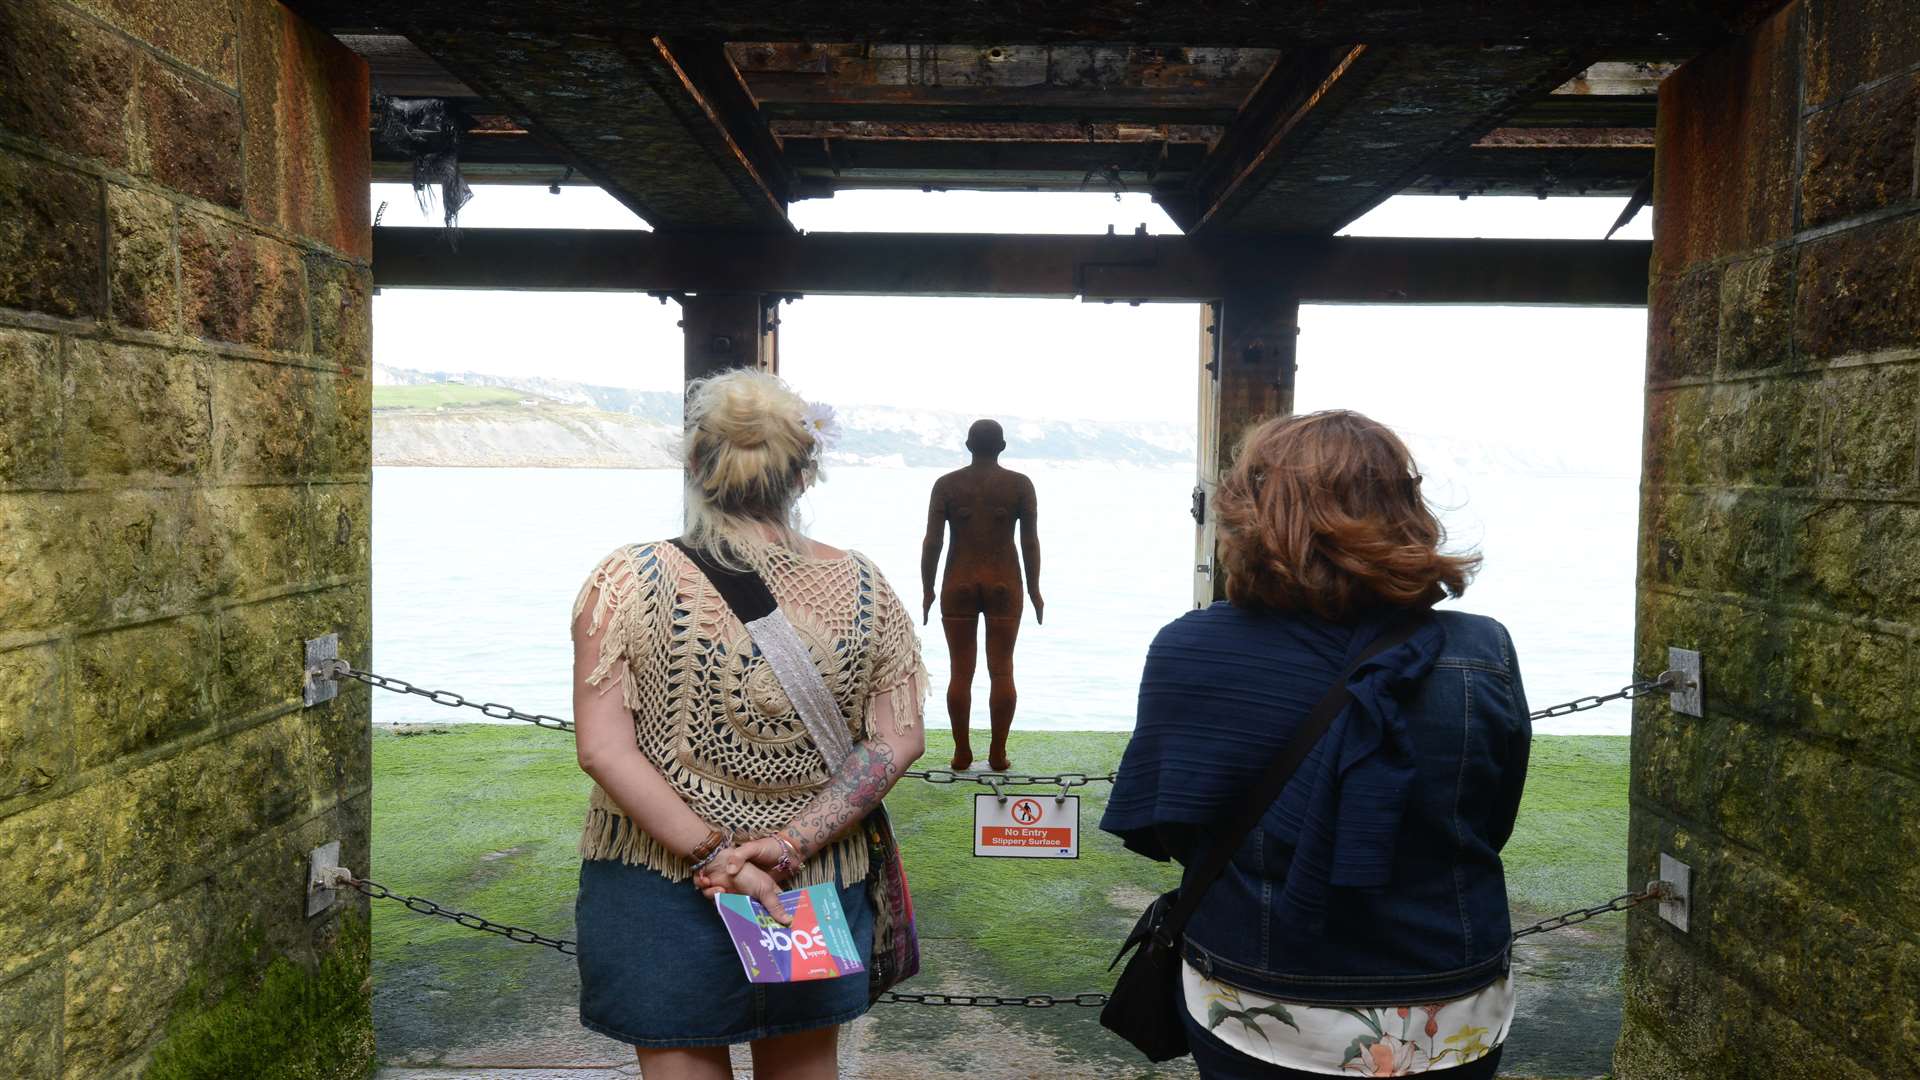 Art buffs checking out Antony Gormley's work at the Harbour Arm in Folketone Picture: Gary Browne